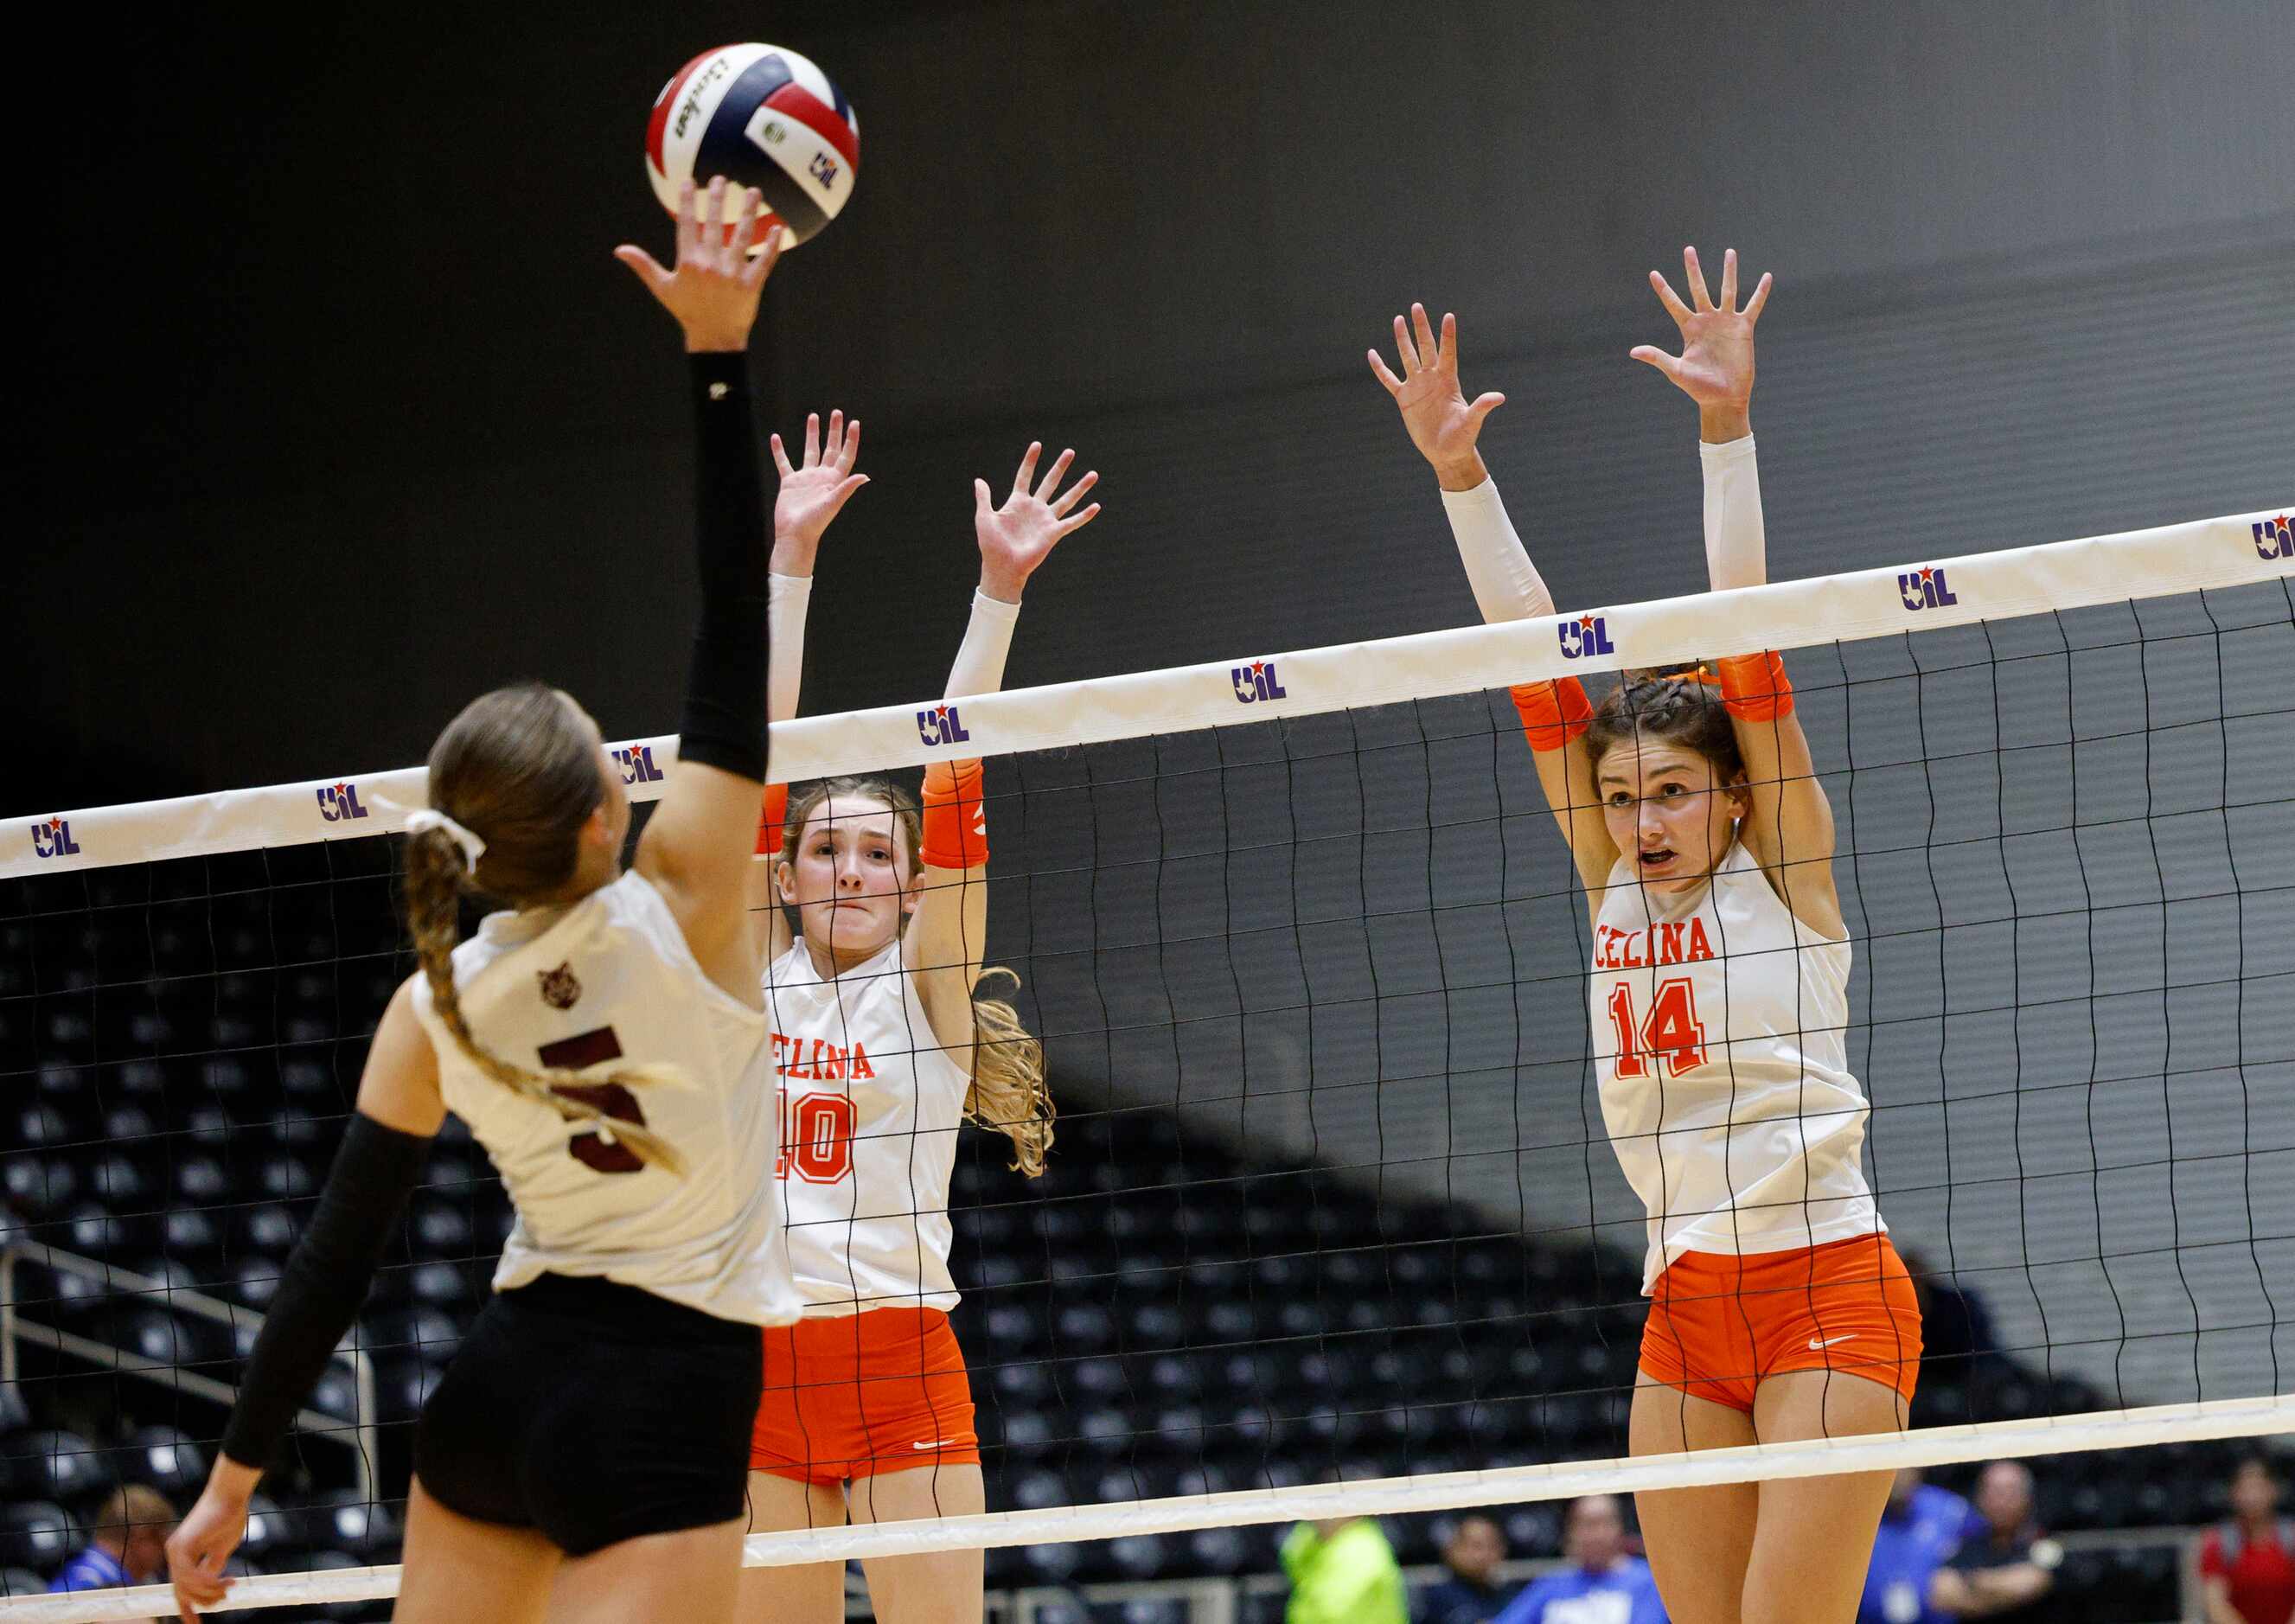 Celina's Ashley Woodrum (10) and Celina's Kennedy Hangartner (14) try to block a spike by...